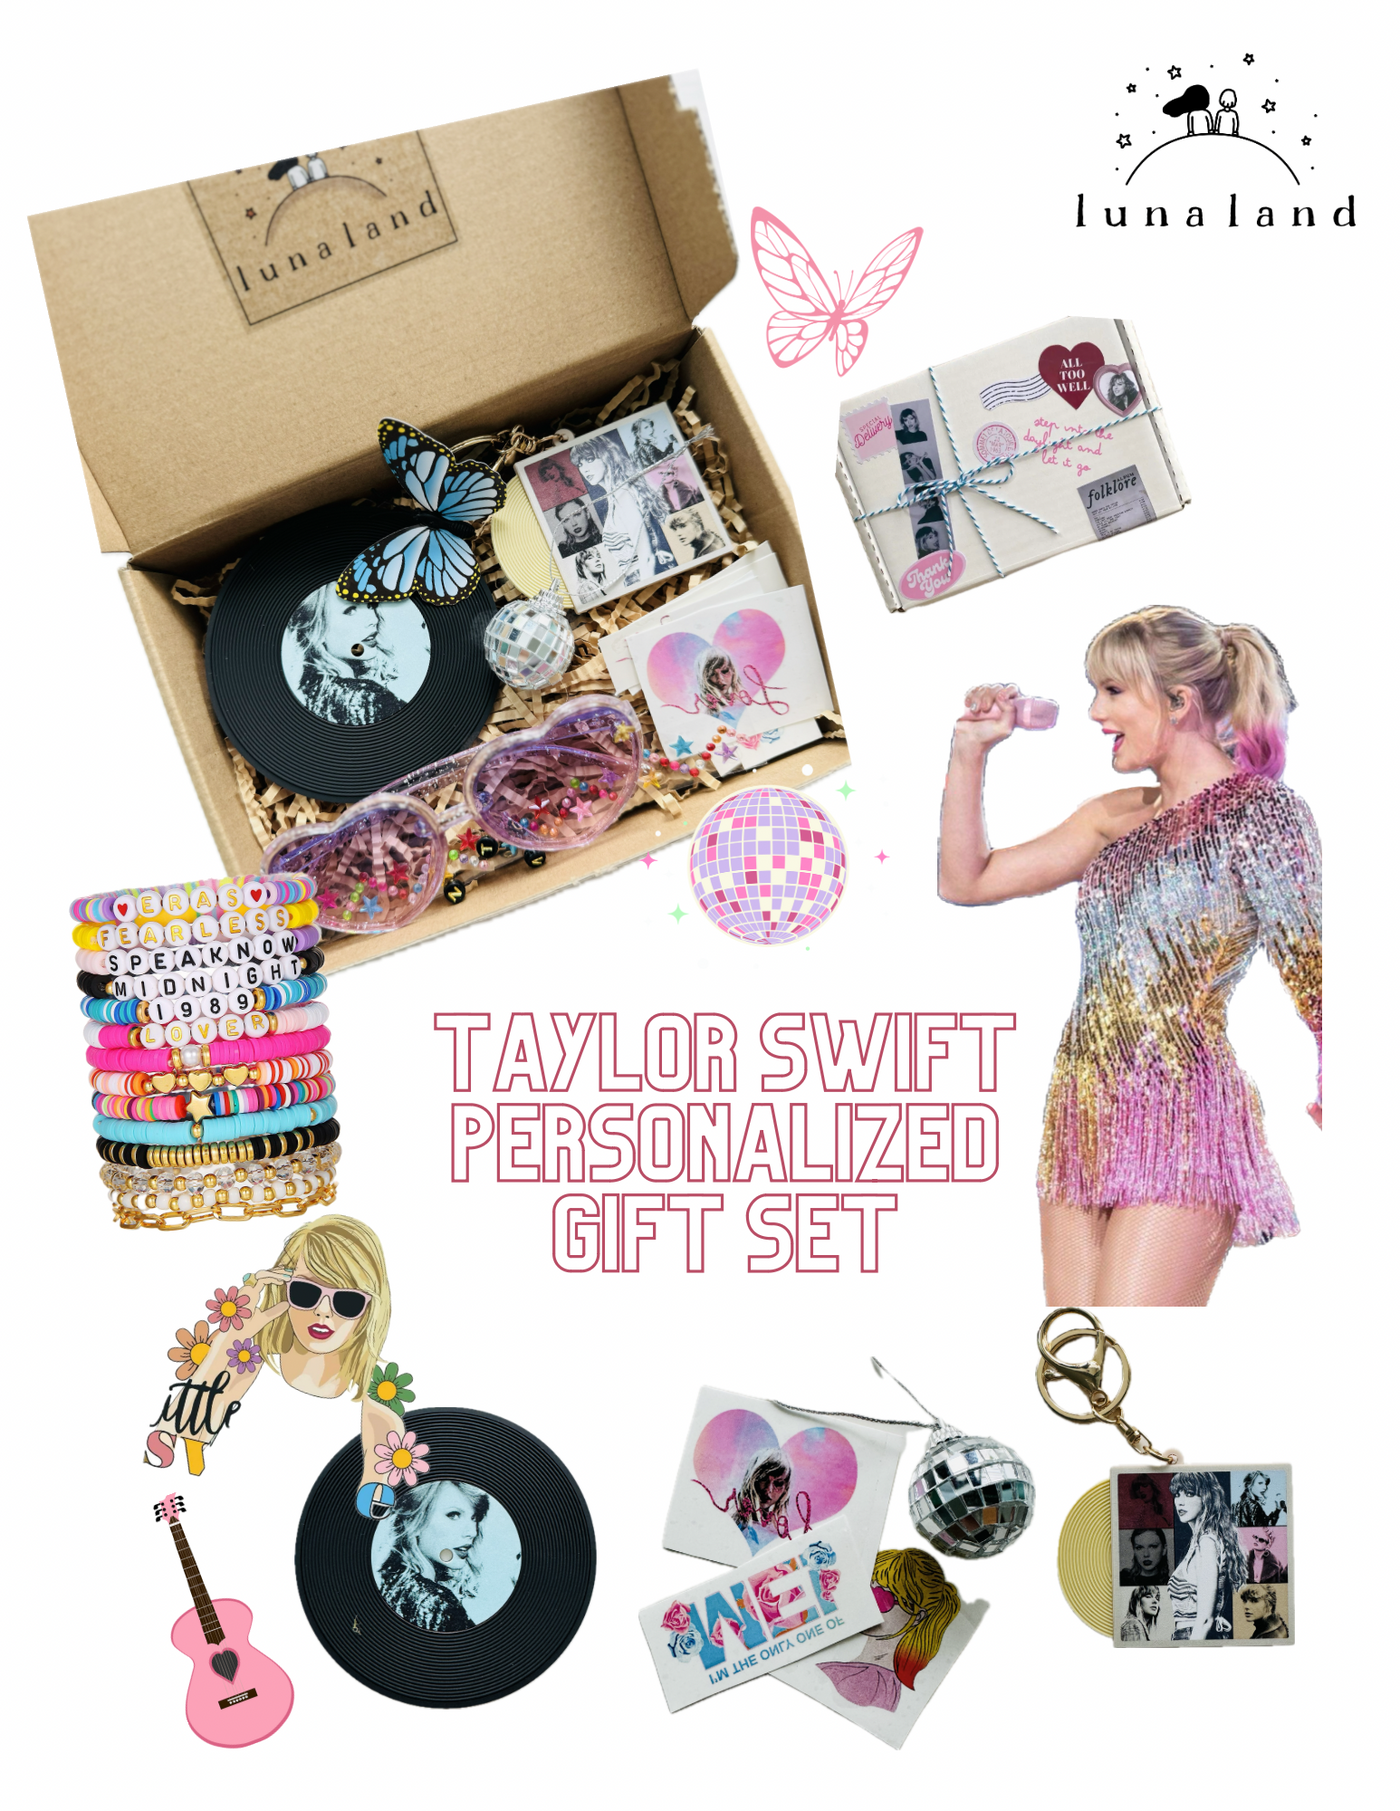 Return / Goodie gift: Taylor Swift inspired gift set (< 10 boxes)